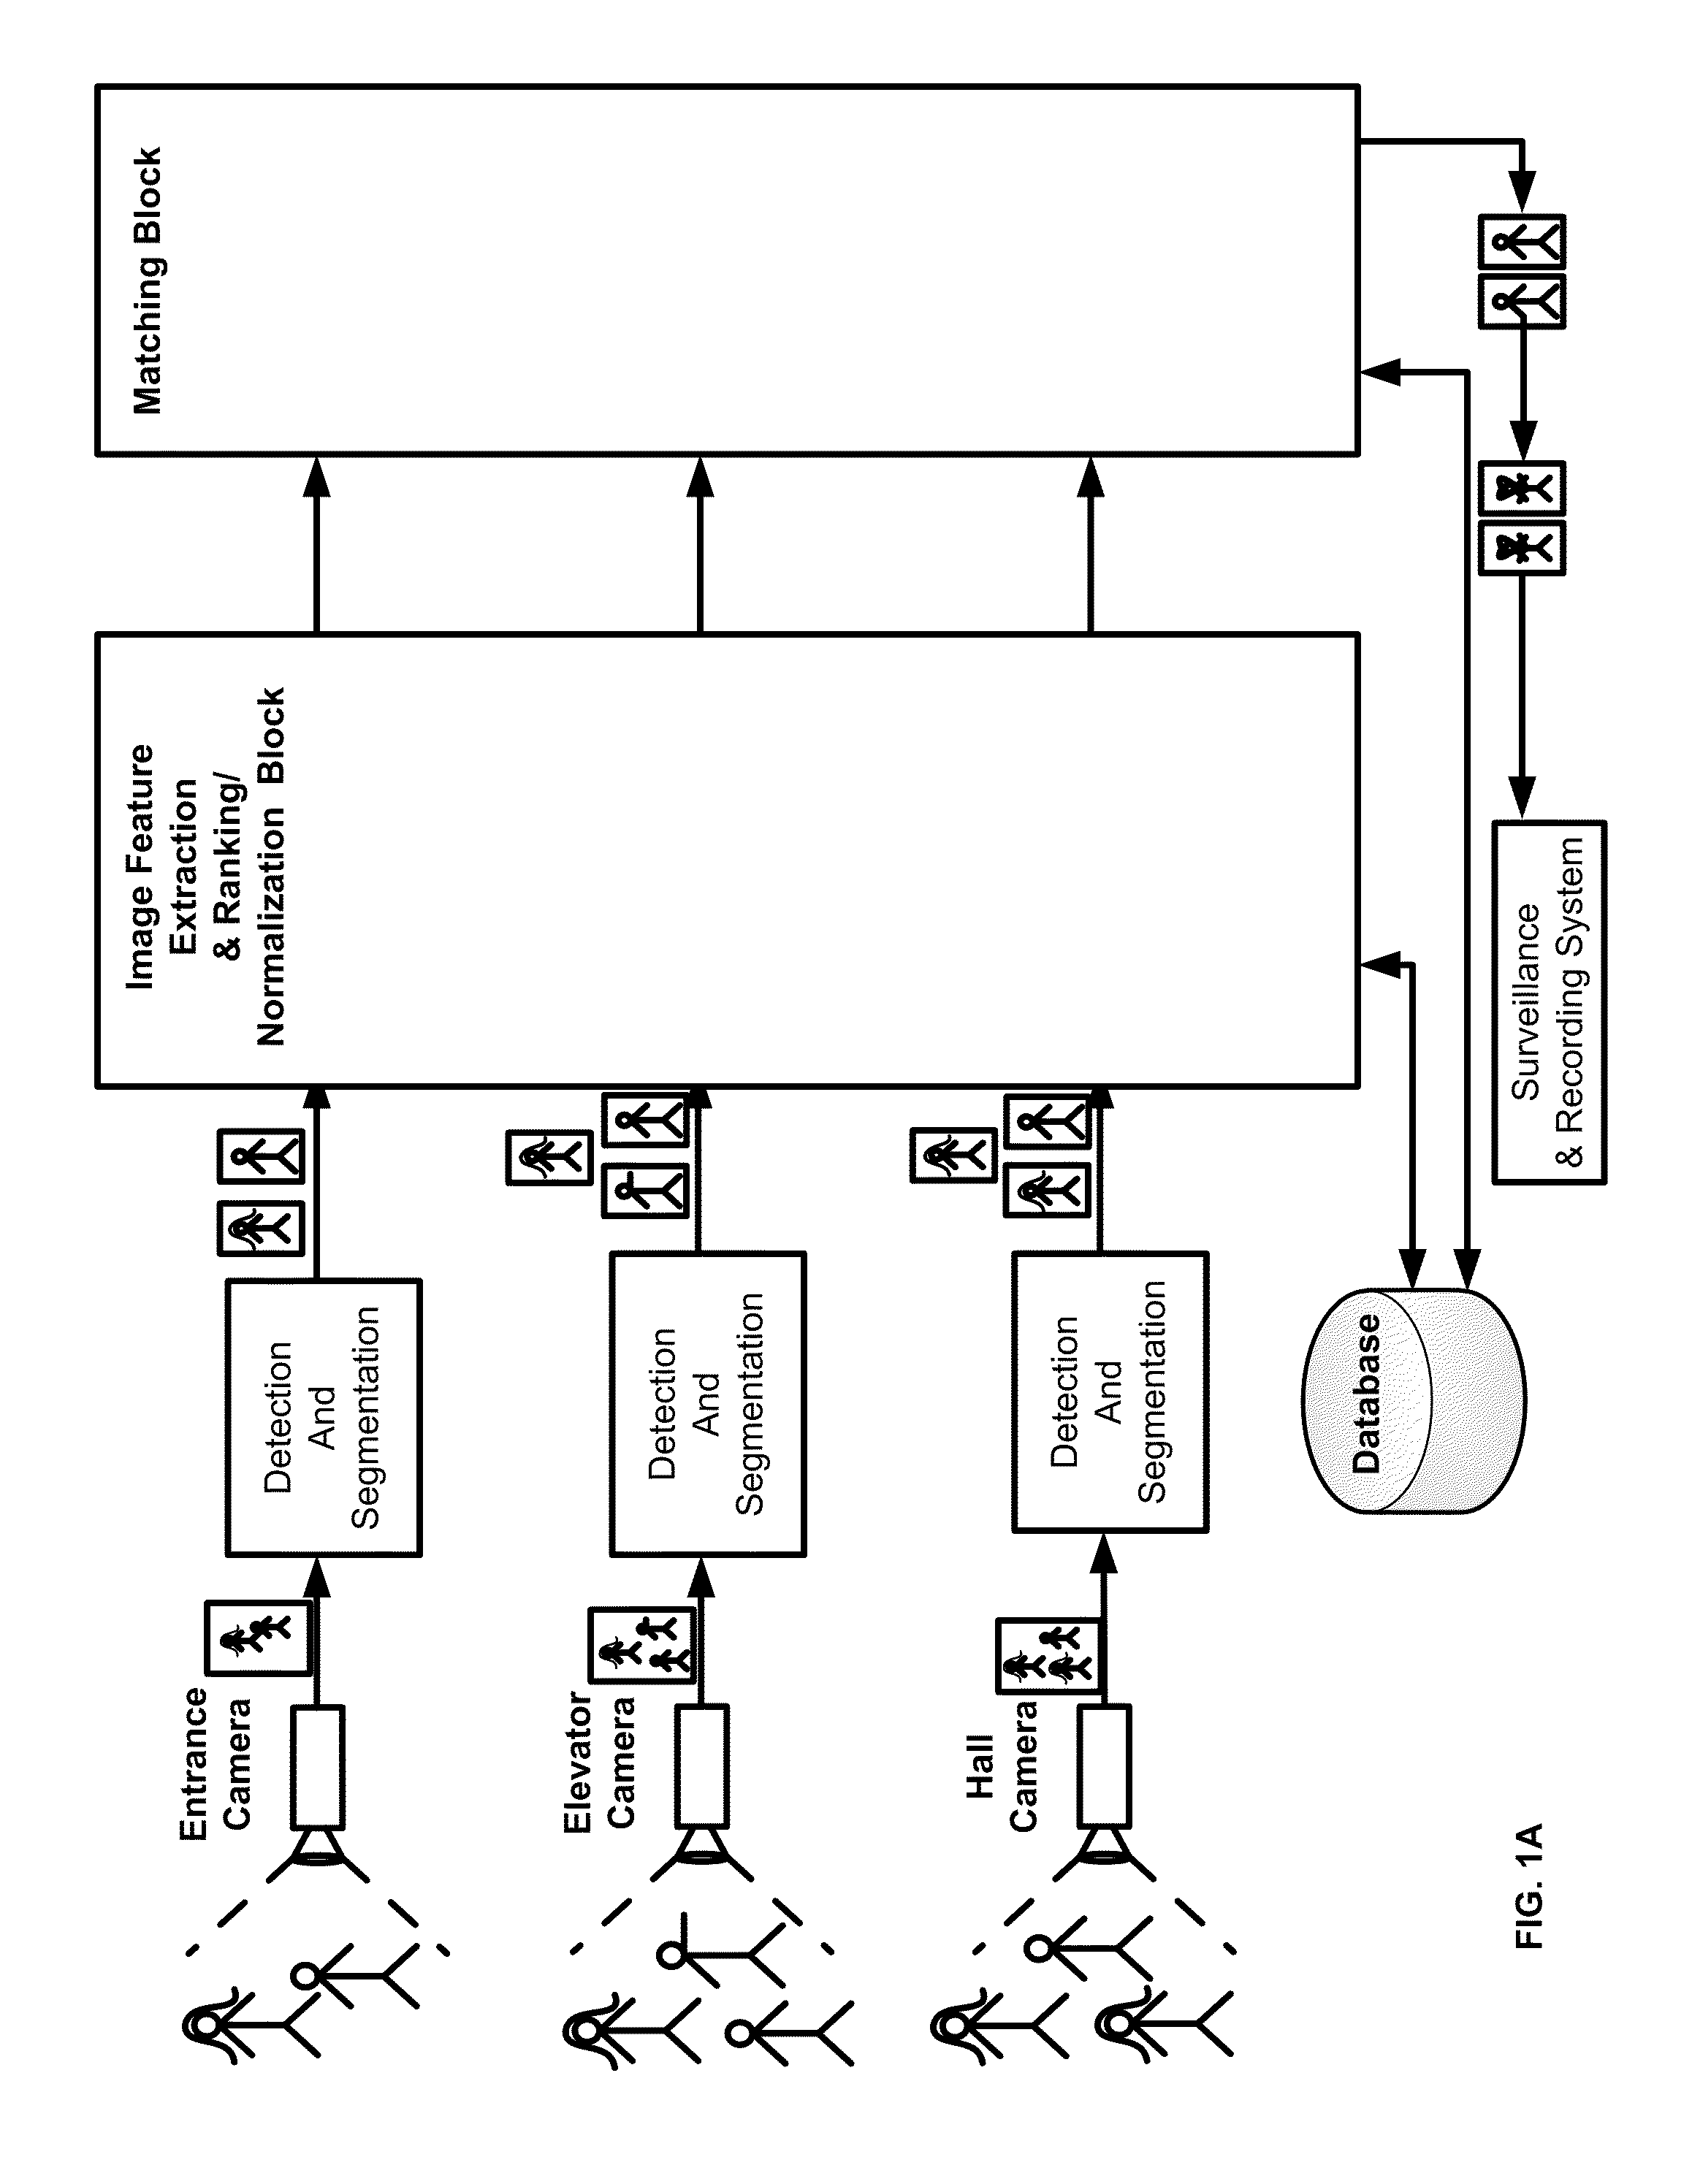 Method circuit and system for matching an object or person present within two or more images